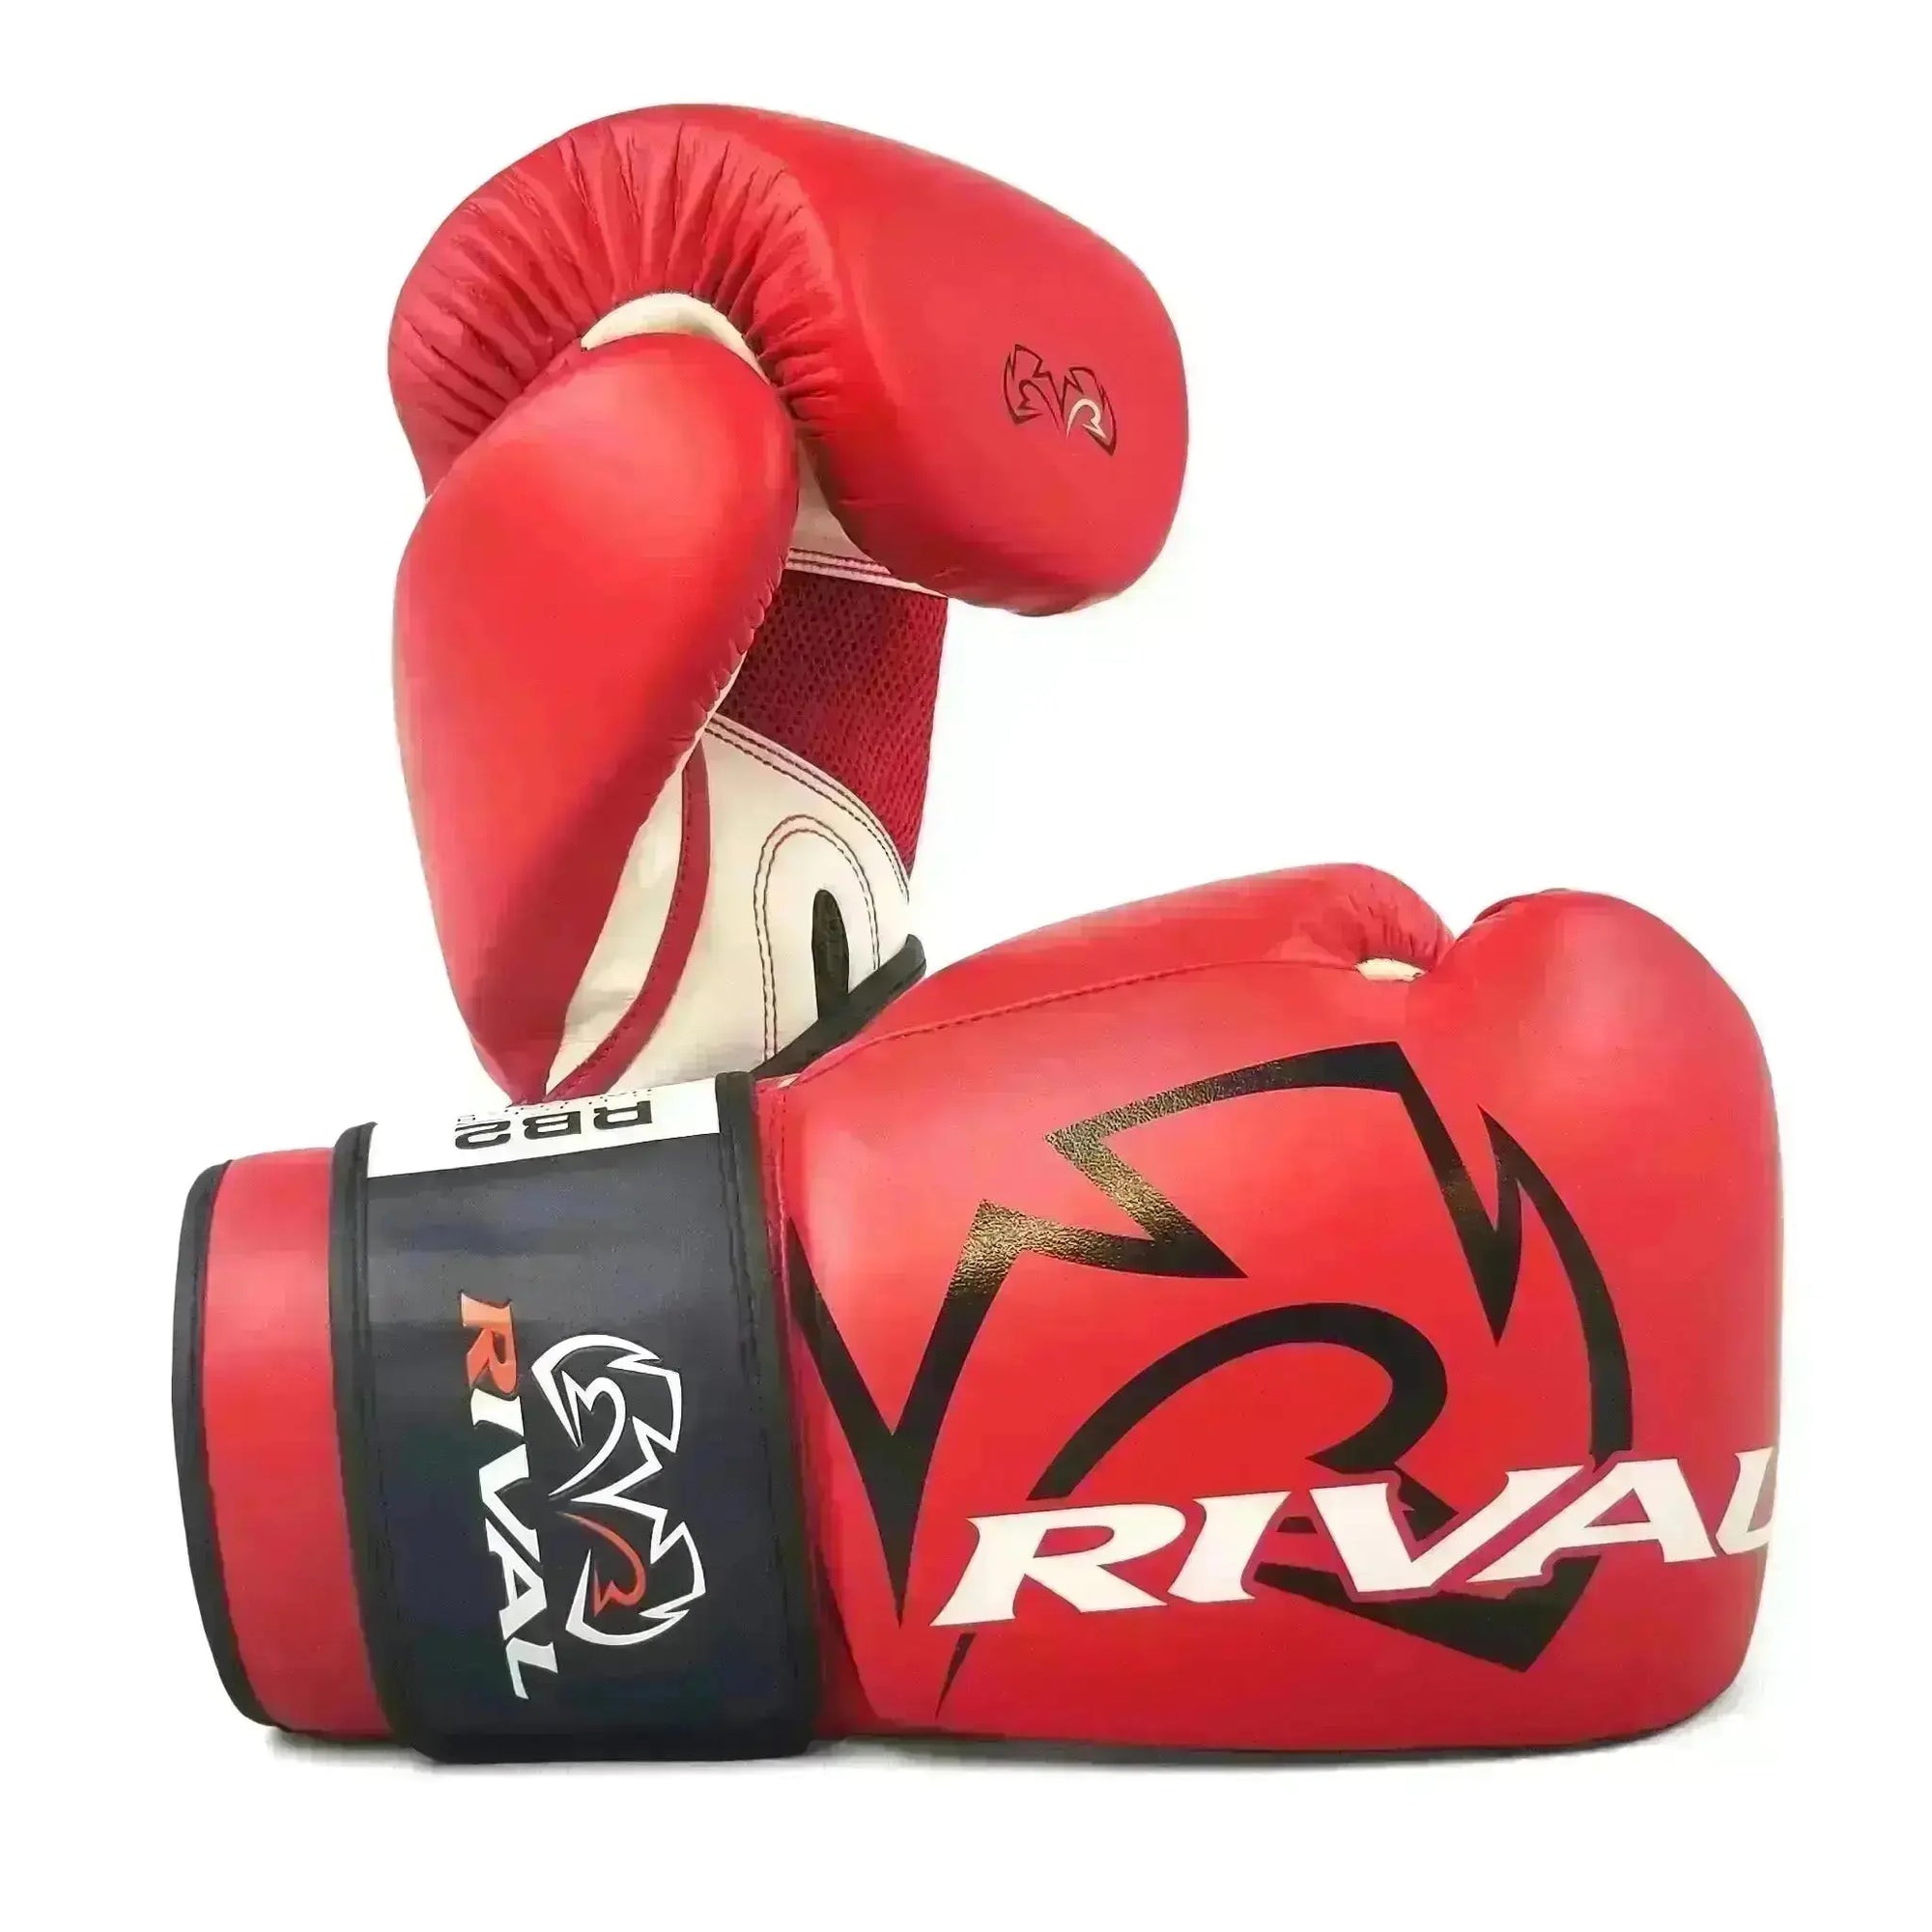 Rival Rb2 Super Bag Gloves 2.0 Red-X-Large-14-16oz Fight Co